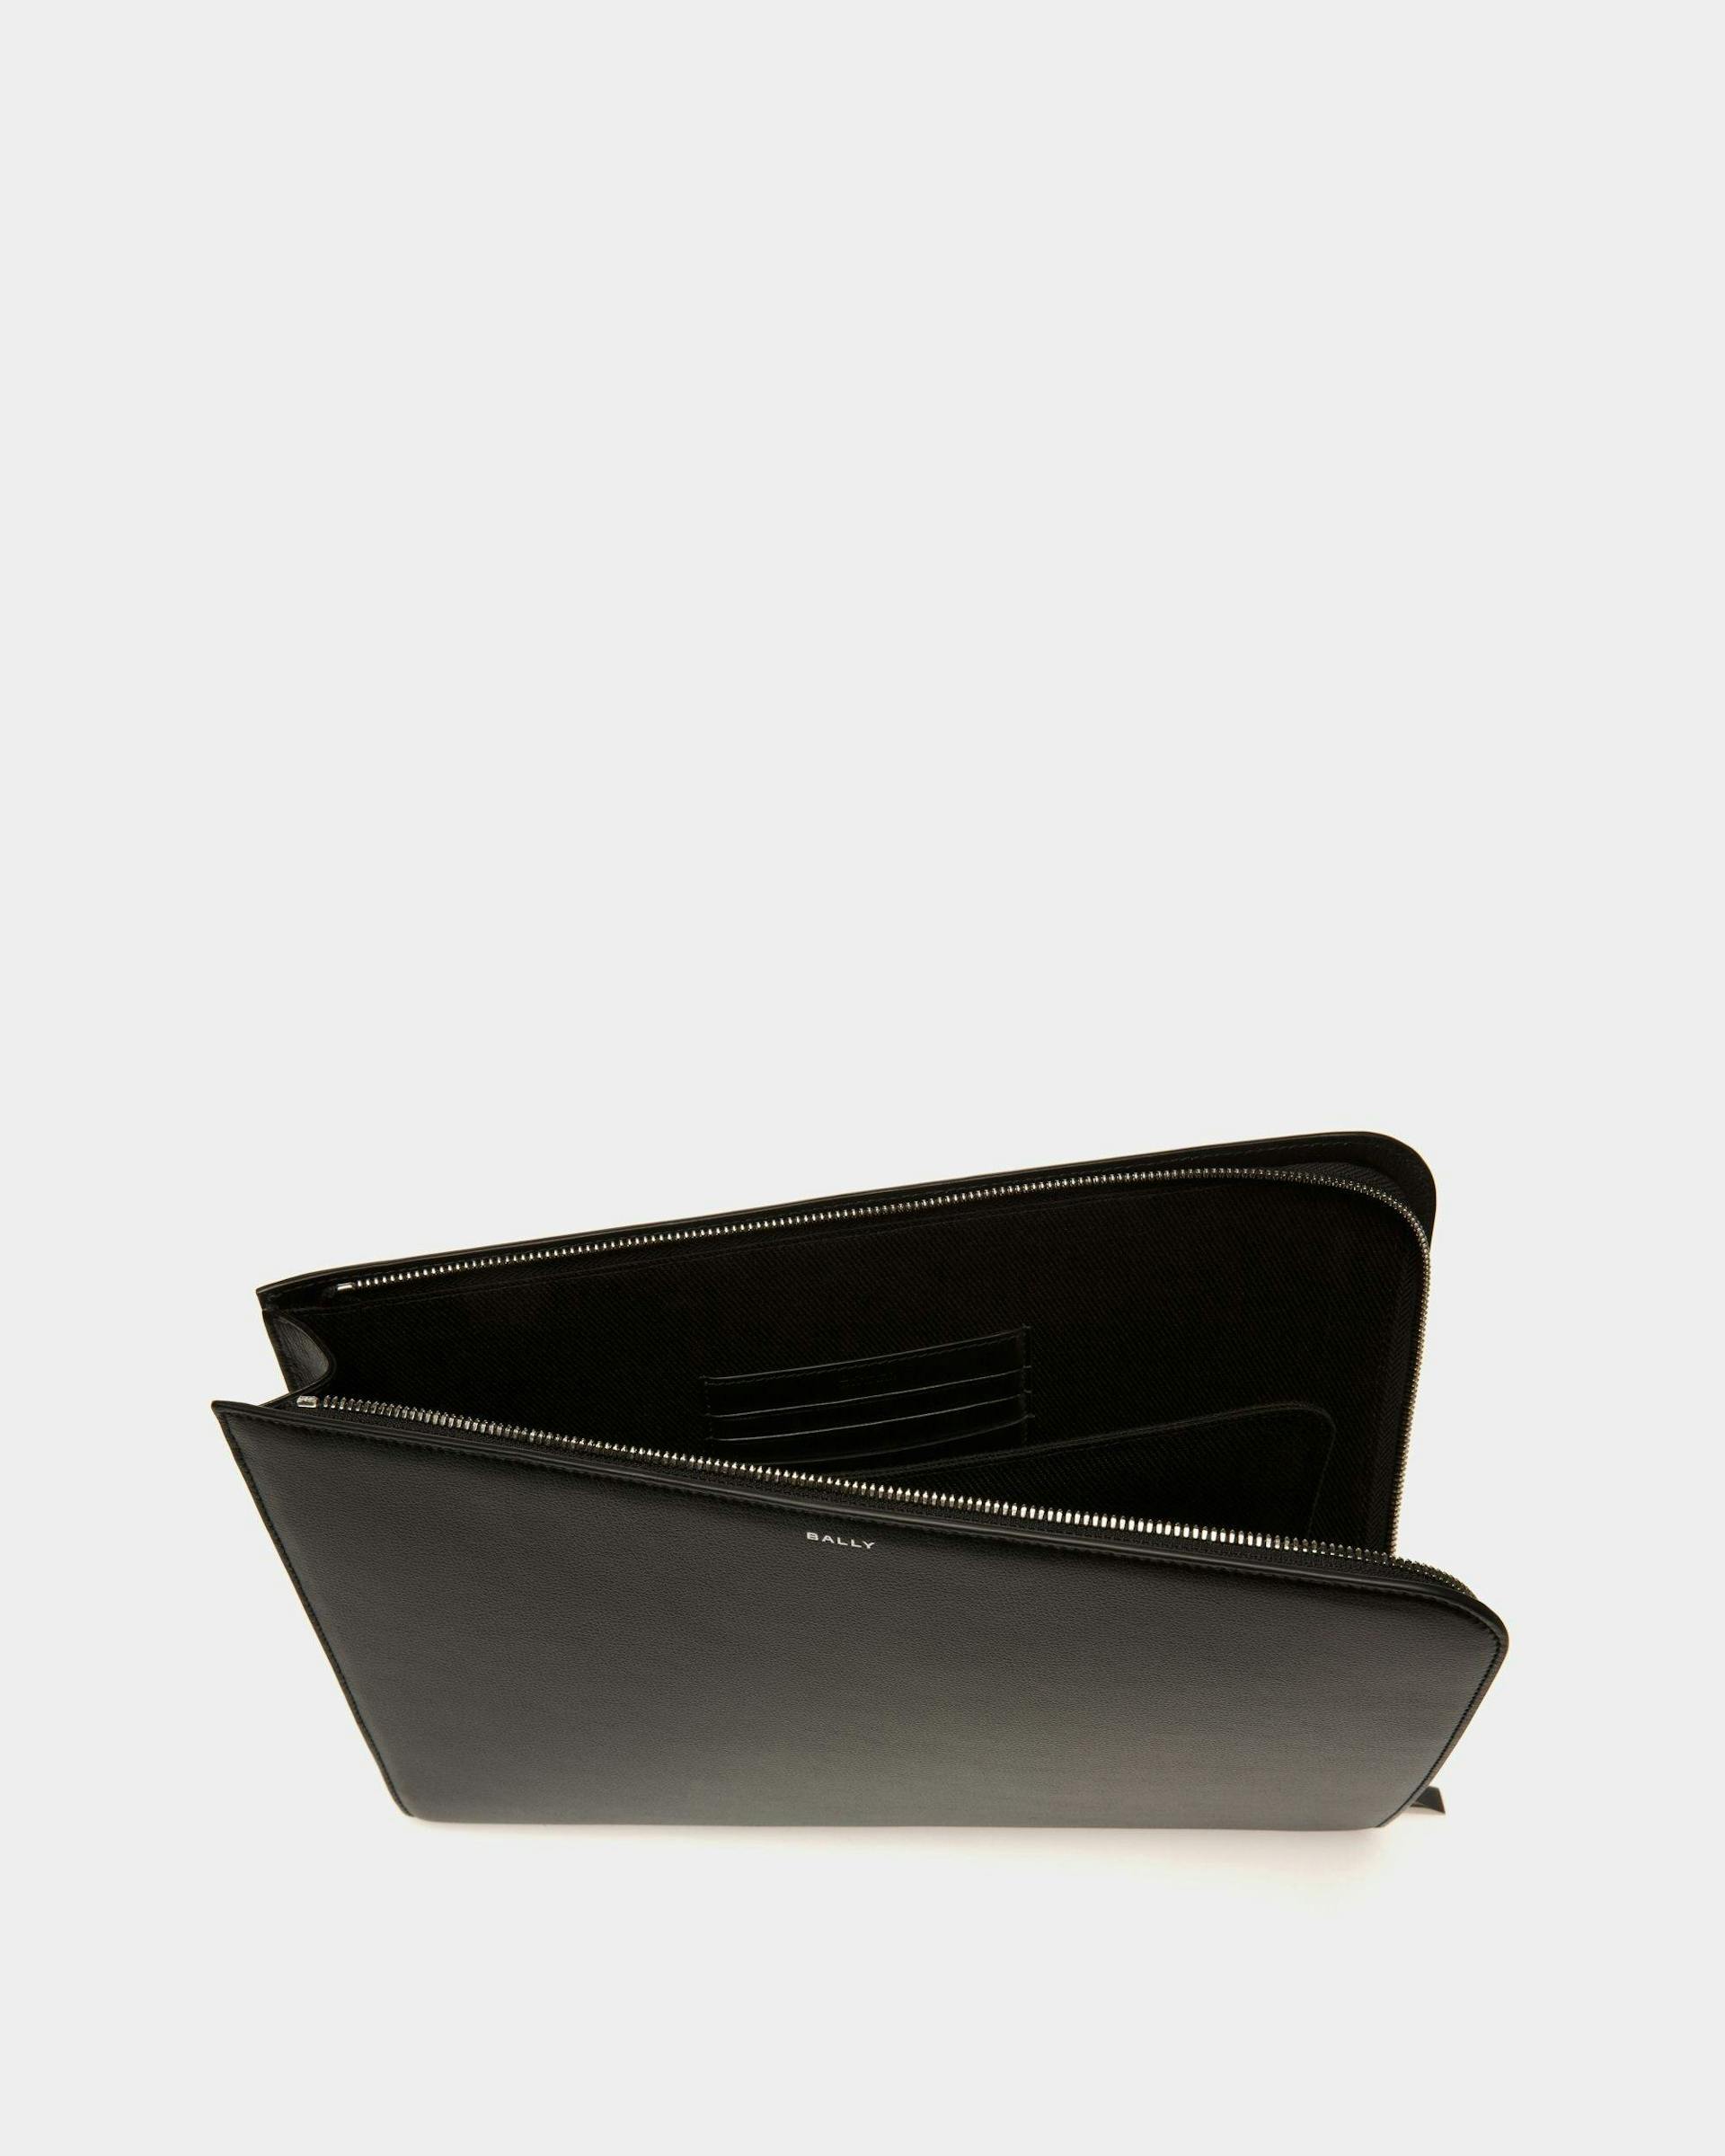 Men's Banque Necessaire In Black Leather | Bally | Still Life Open / Inside